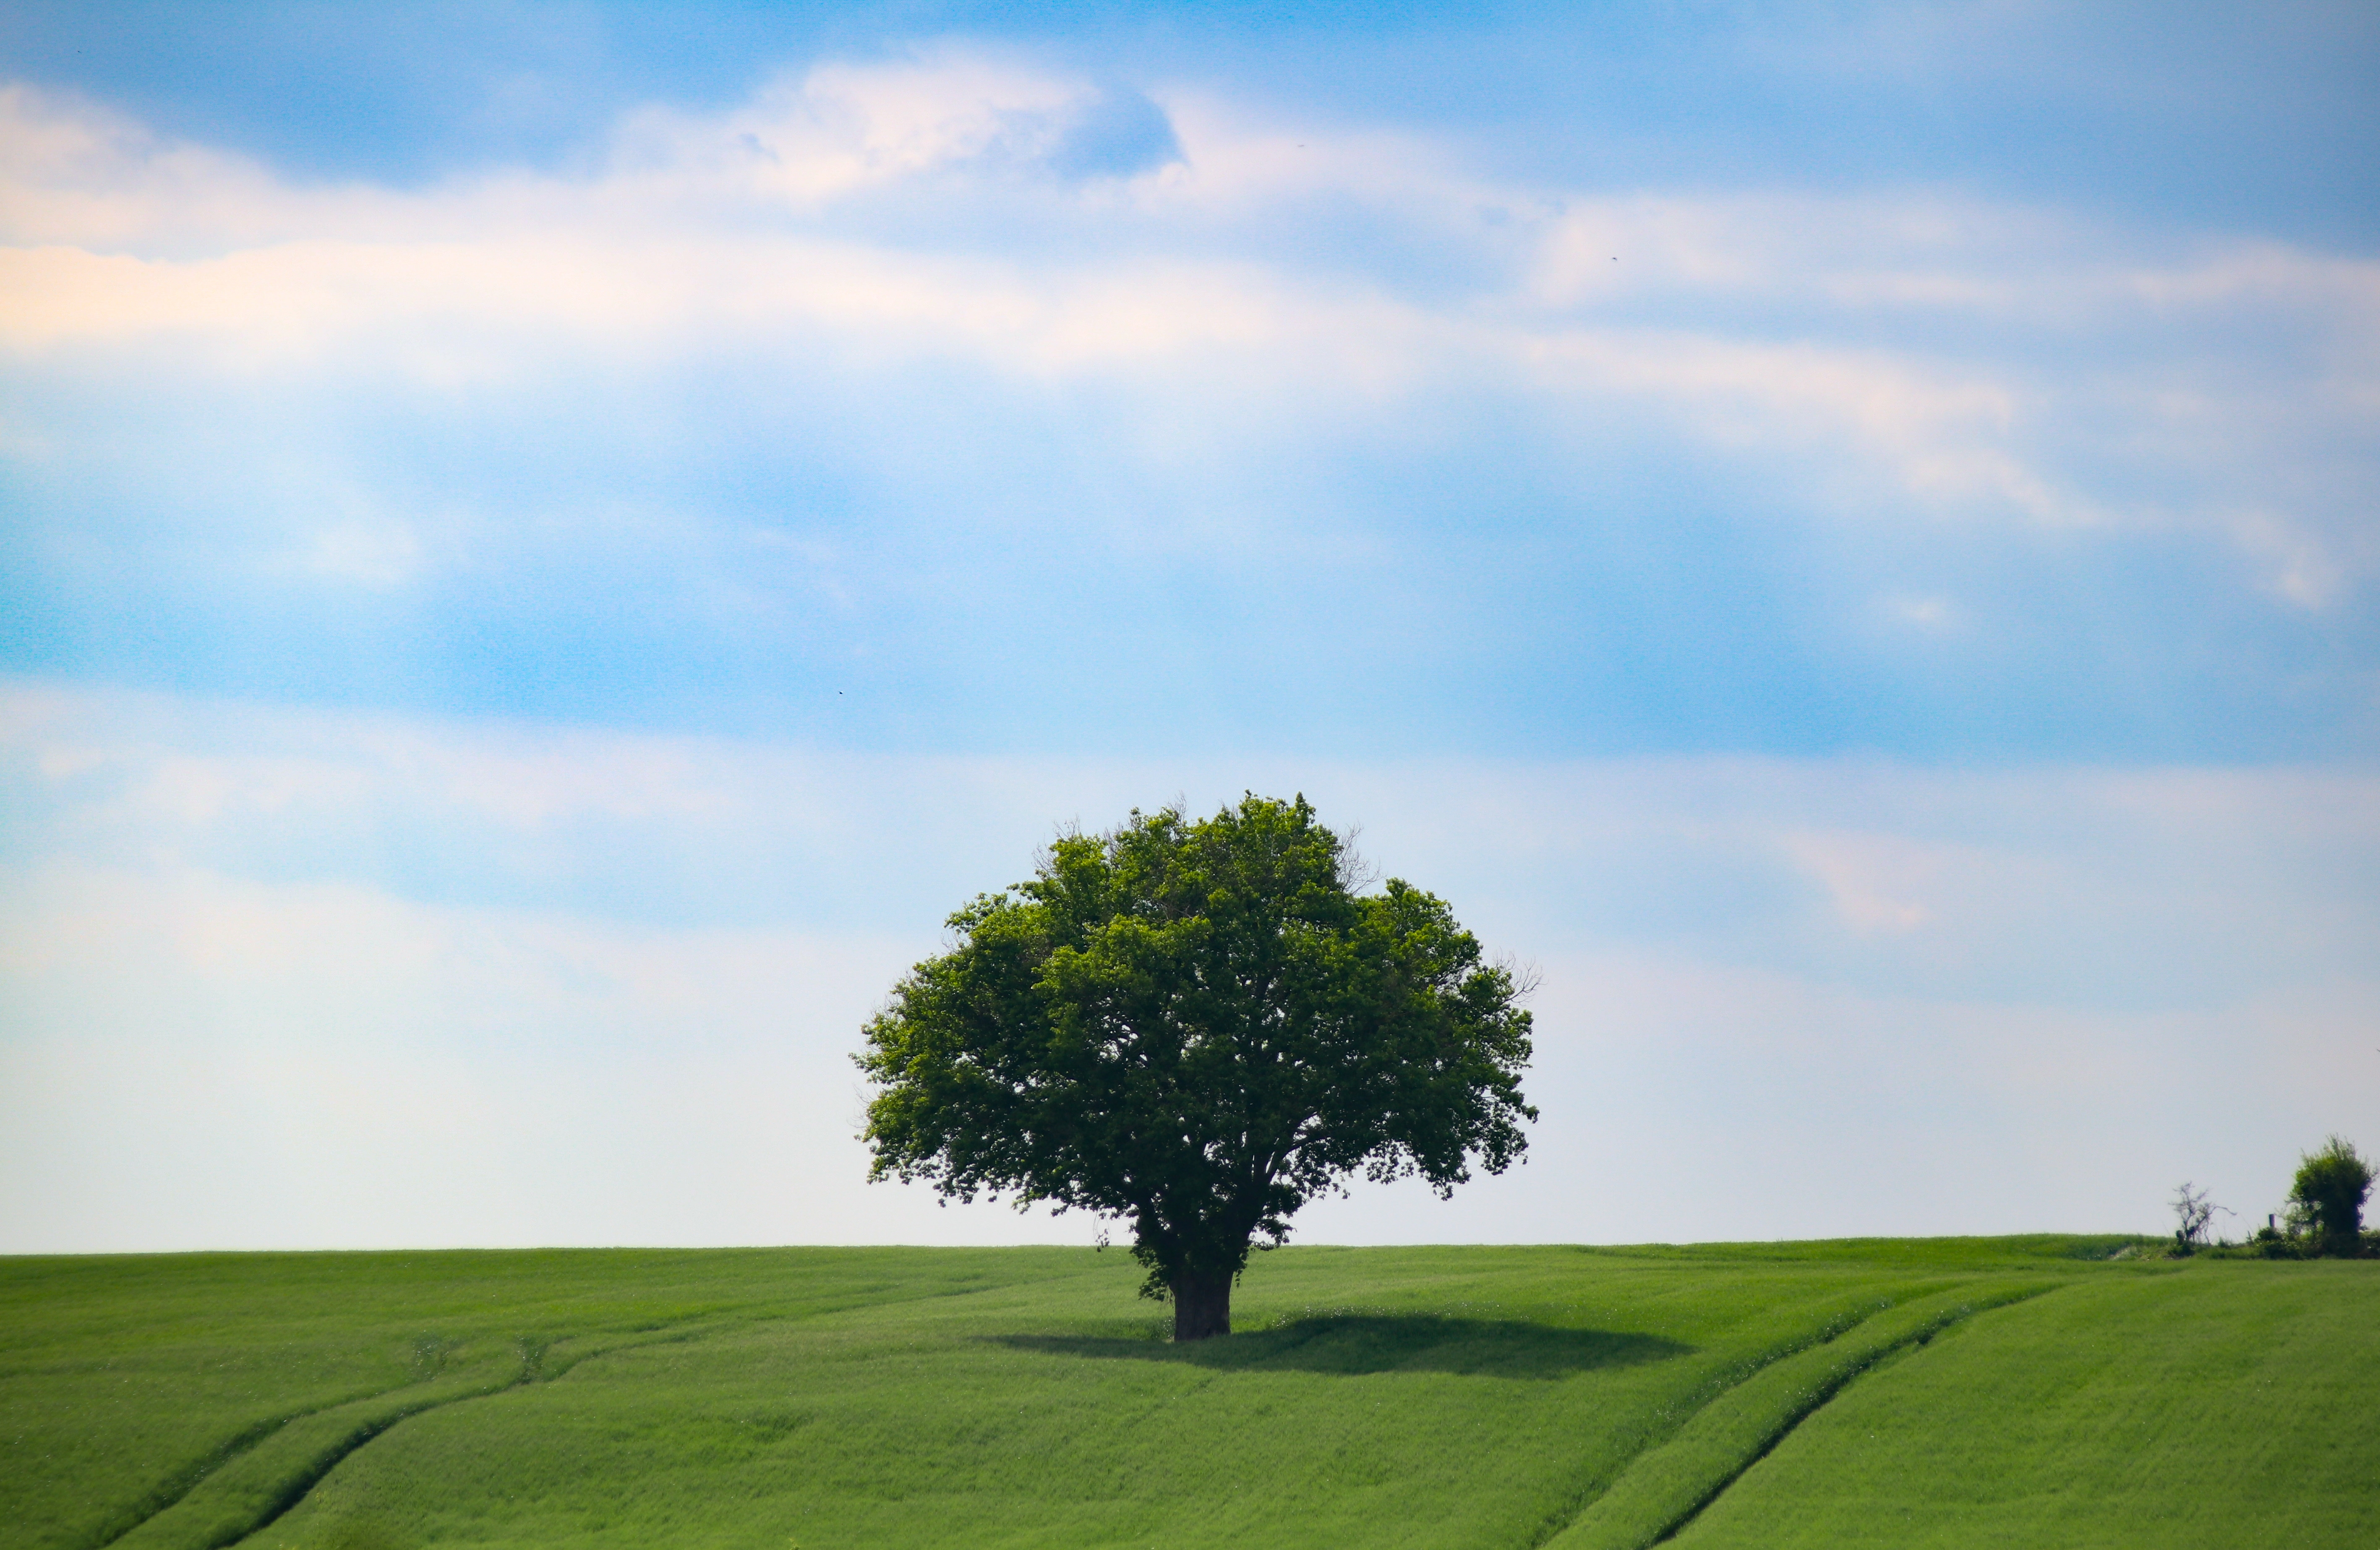 beautiful-shot-of-a-lonely-tree-standing-in-the-middle-of-a-greenfield-under-the-clear-sky.jpg